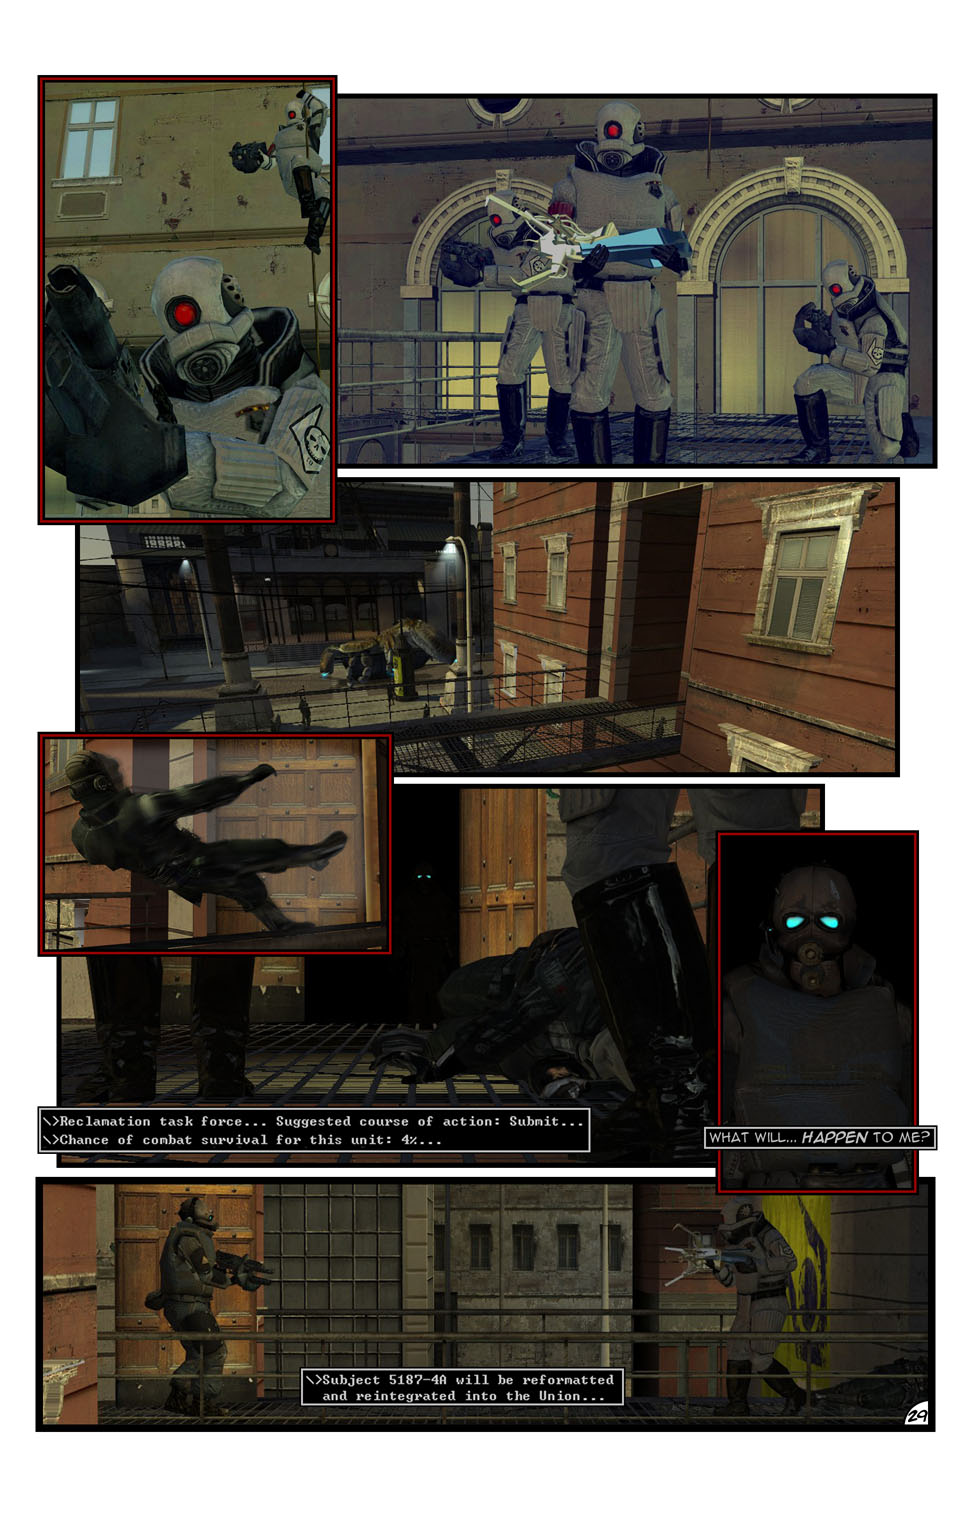 The elite soldiers rappel into the opposite building, which is connected to the present one by a walkway. The running Civil Protection officer is thrown through the door and outside by the soldier, who comes face to face with the reclamation task force. The AI tells the soldier to submit and, when they ask what will happen to them, it explains that they will be reformatted and reintegrated.